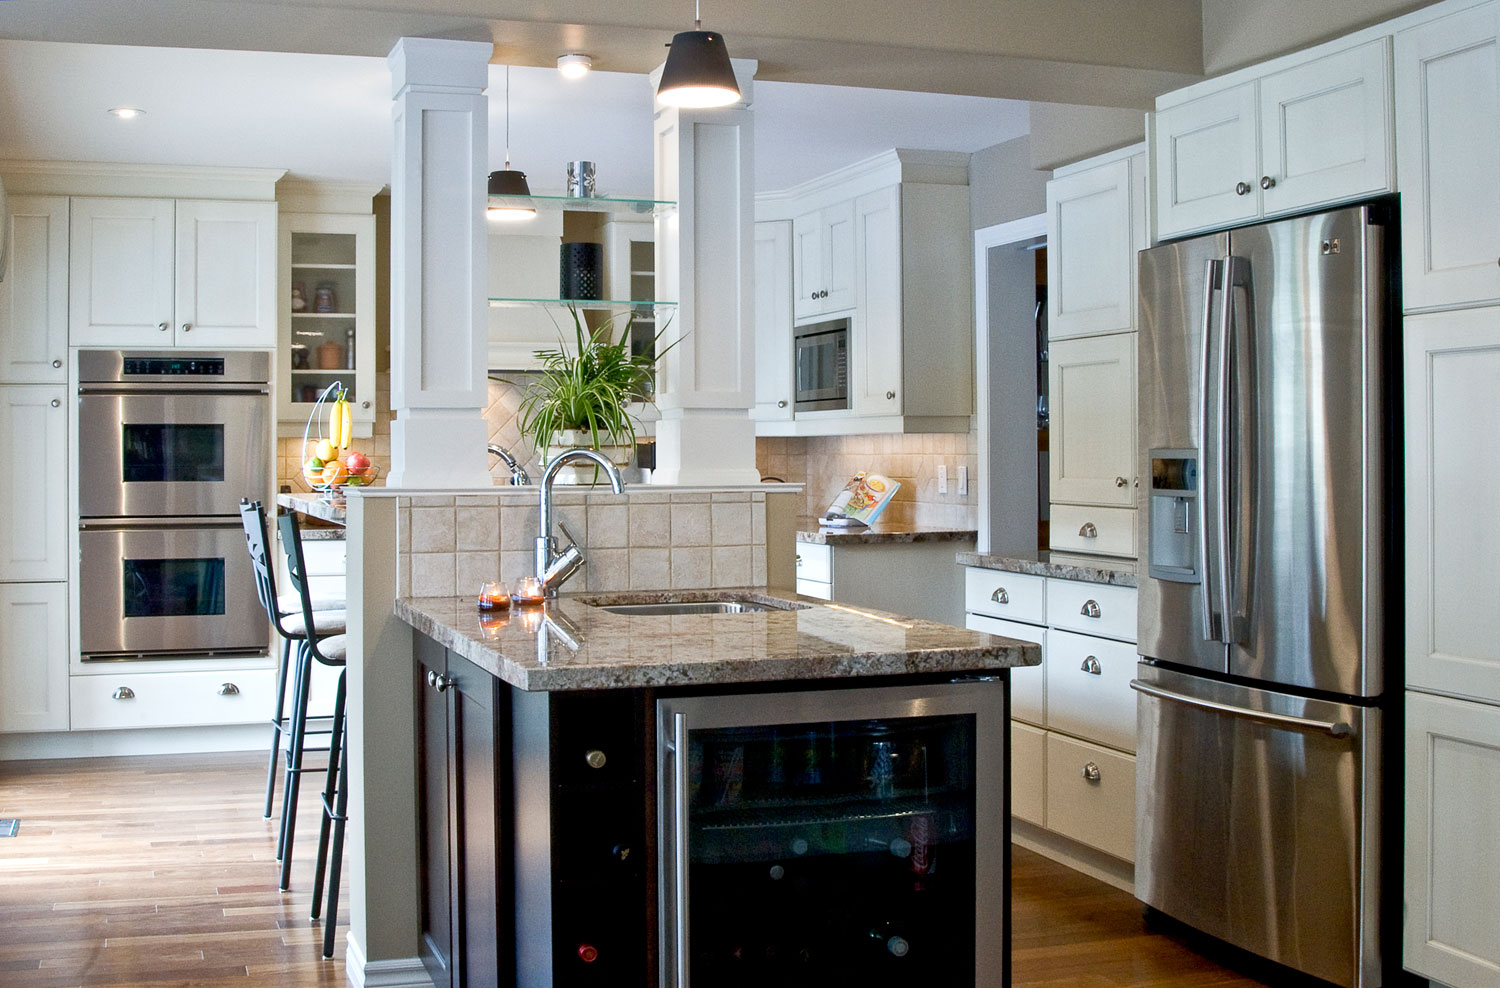 White kitchen design with hardwood floors and bar fridge - Total Living Concepts barrie ontario